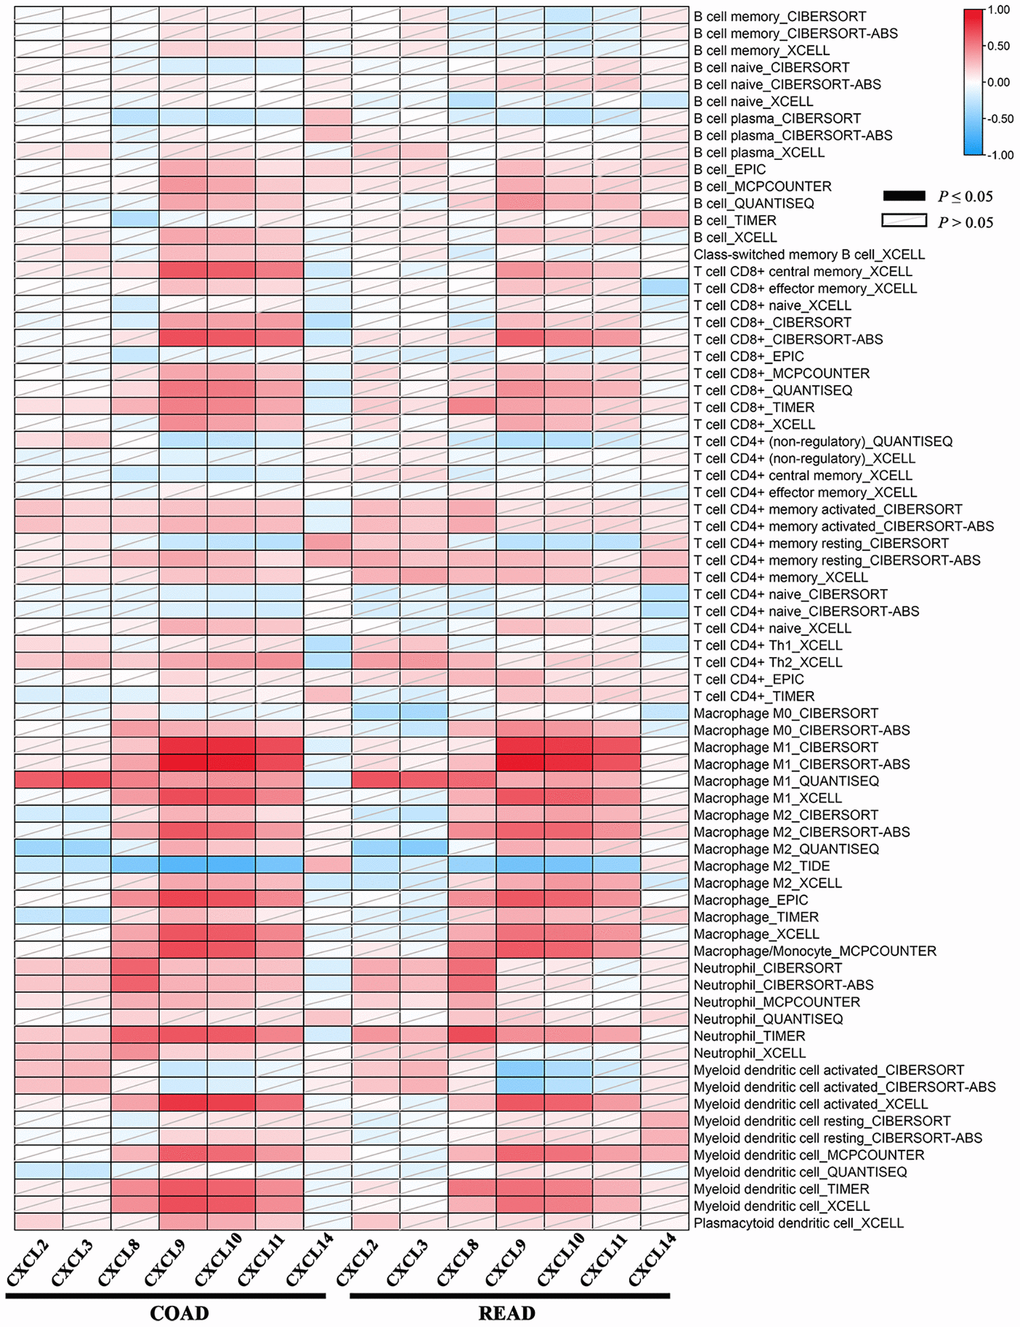 The association between the CXC chemokines expression and immune infiltration level of multiple immune cells types estimated by all six algorithms in ad heatmap table across COAD and READ. The red indicates a statistically significant positive association (P ≤ 0.05, rho > 0), and the blue indicates a statistically significant negative association (P ≤ 0.05, rho P > 0.05).